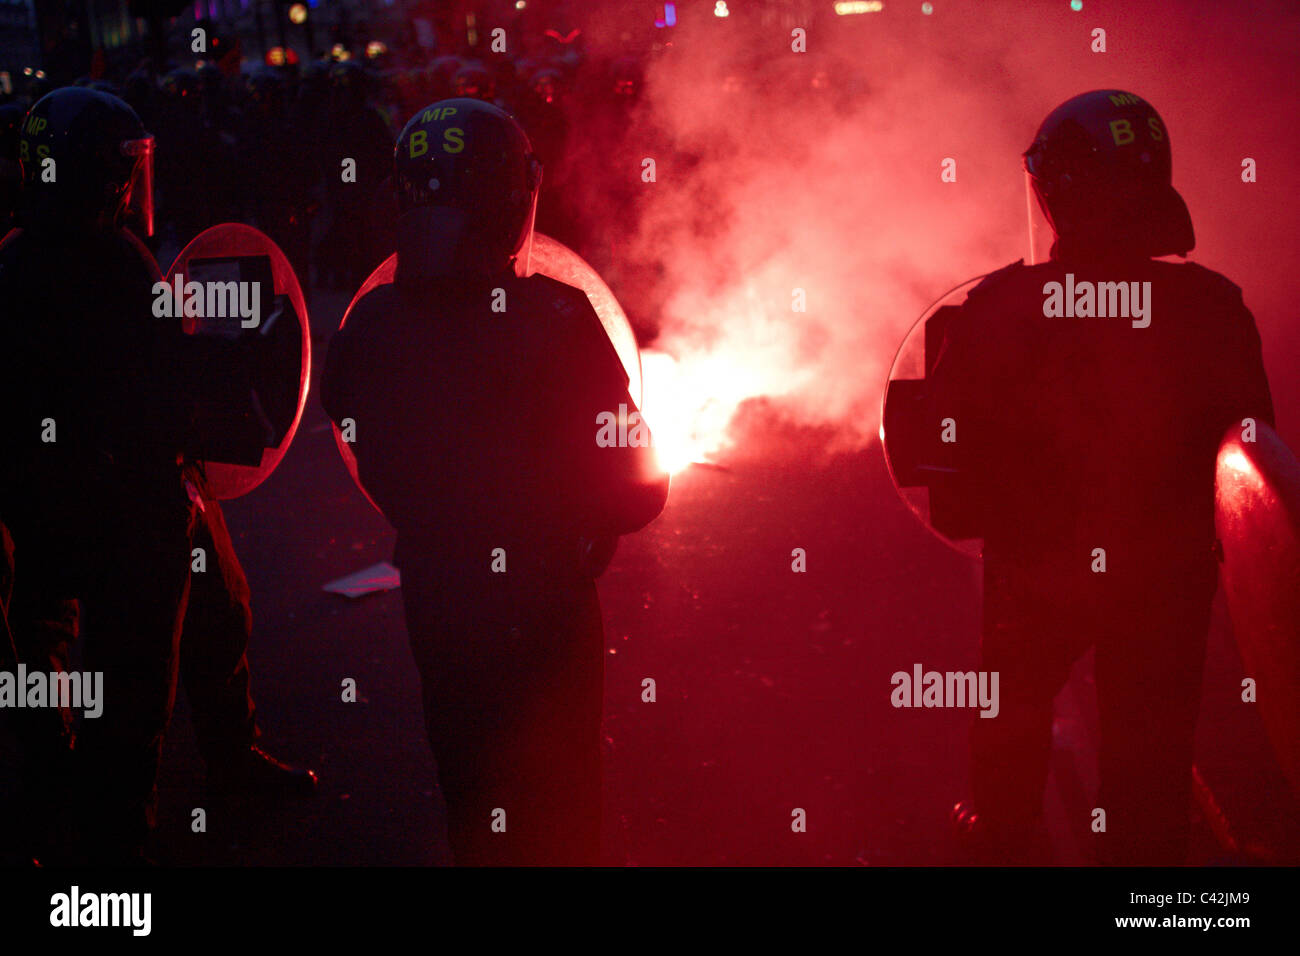 Riot policeman silhouetted against a red flare during the March for the Alternative Stock Photo